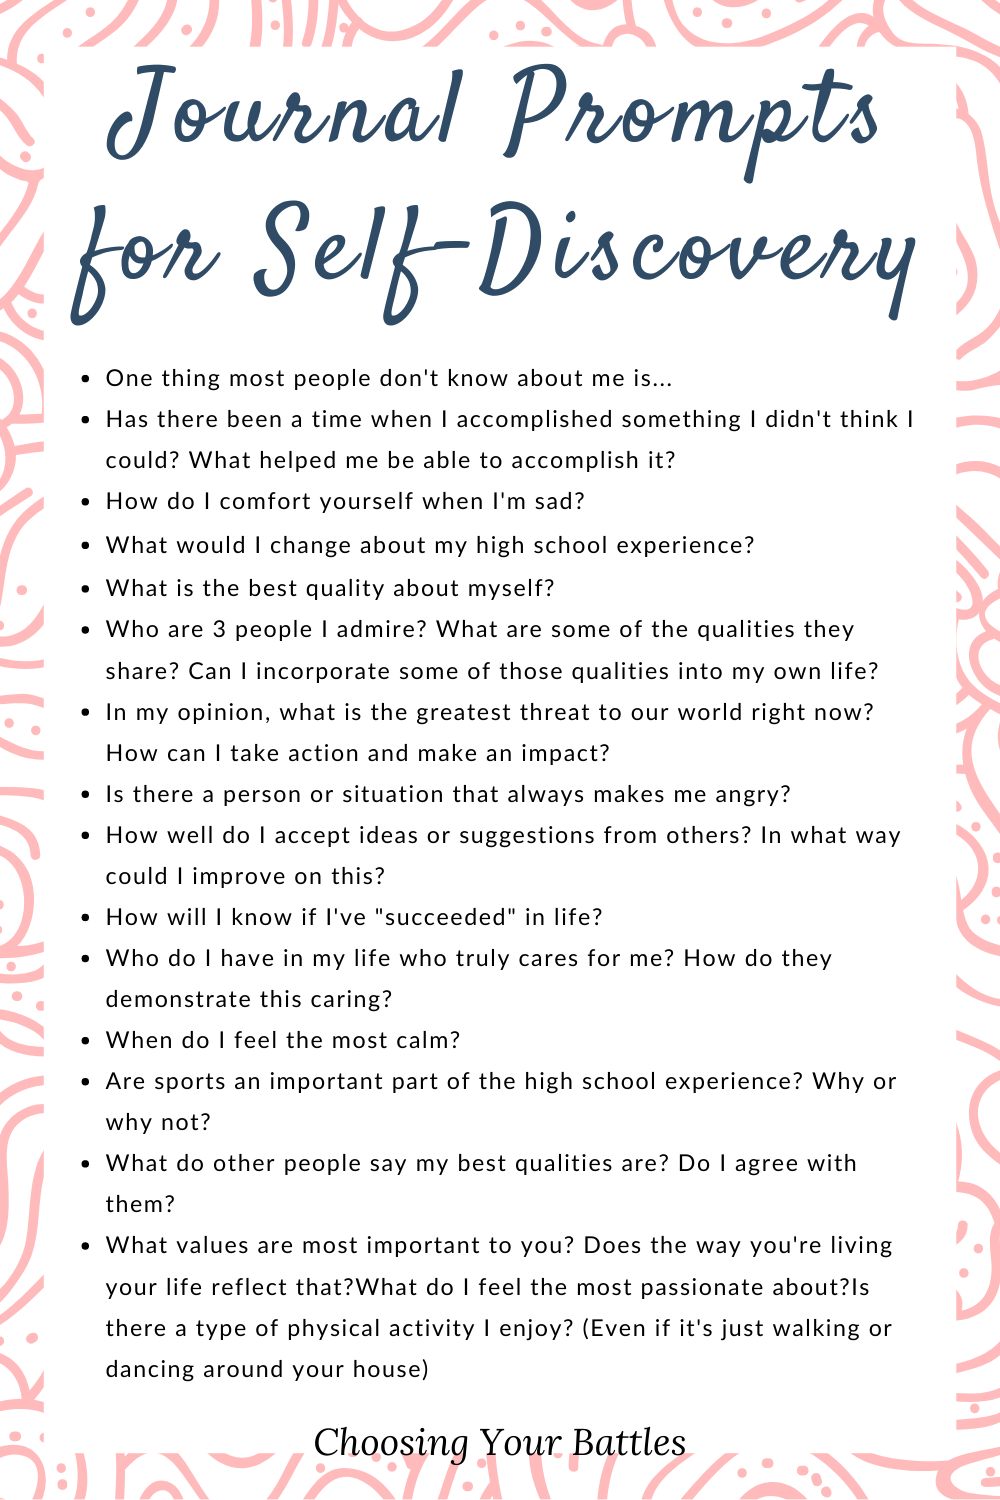 33 Self Discovery Journal Prompts for Teens - Choosing Your Battles